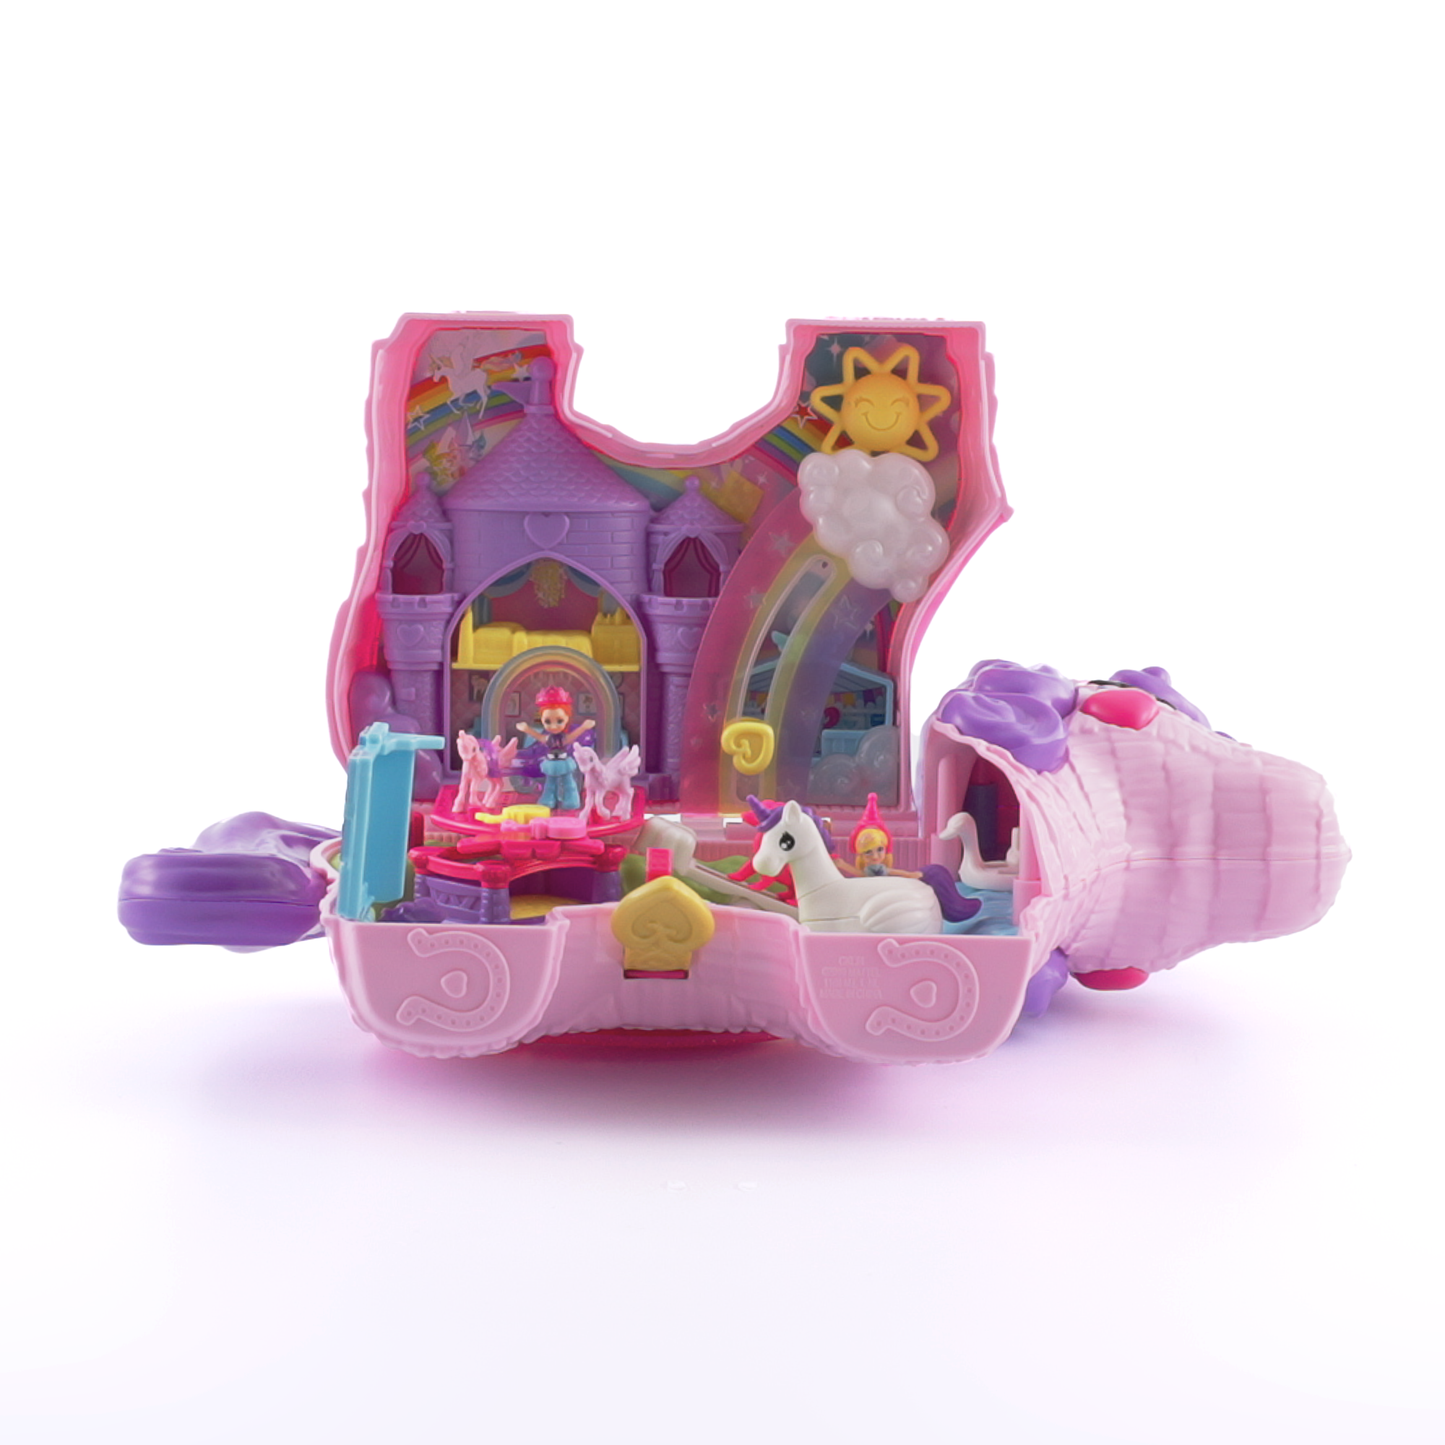 Polly Pocket Mini Toys, Compact Playset And 2 Dolls, Unicorn Party